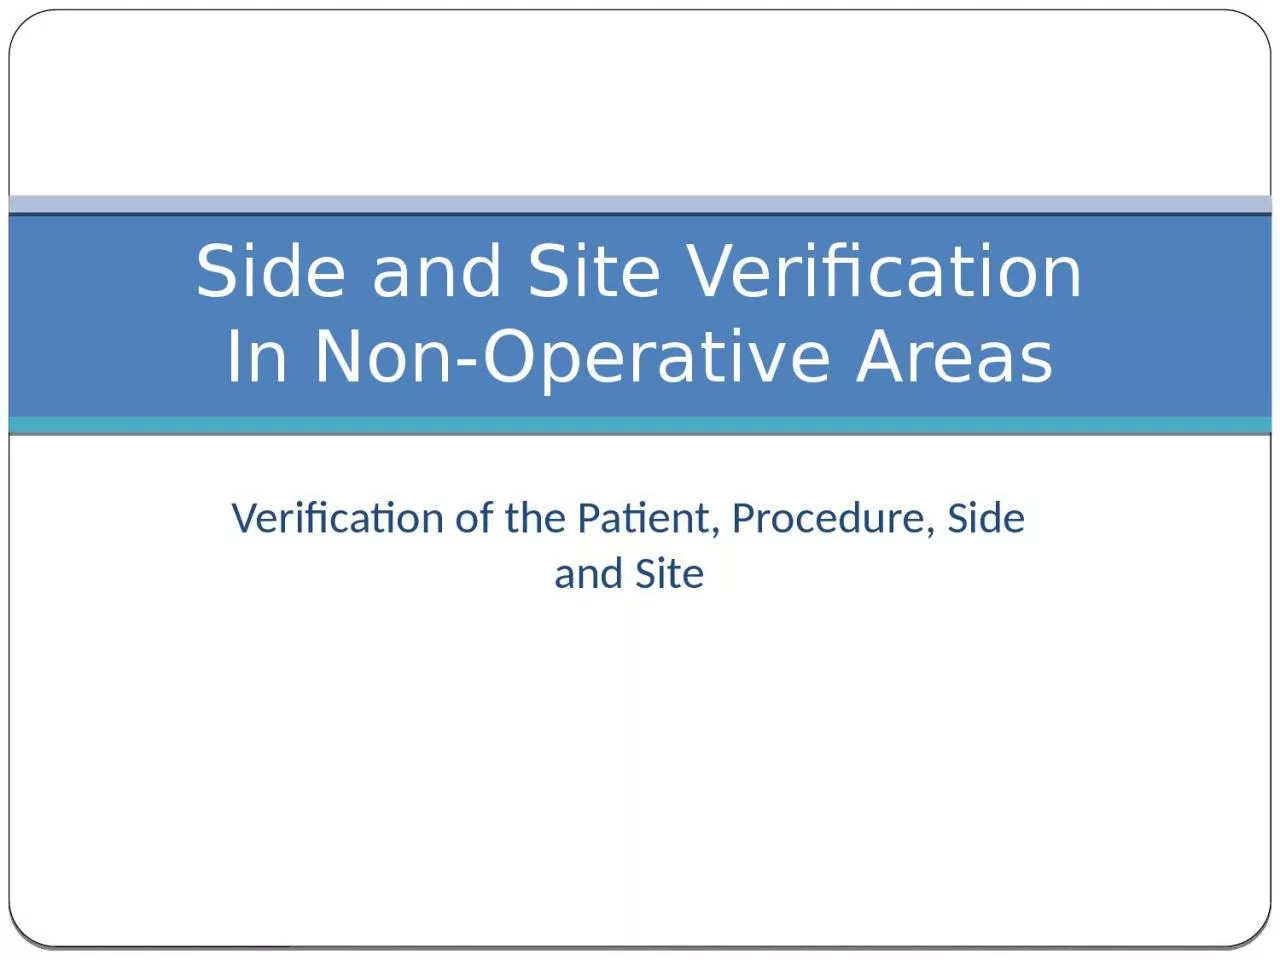 Verification of the Patient, Procedure, Side and Site